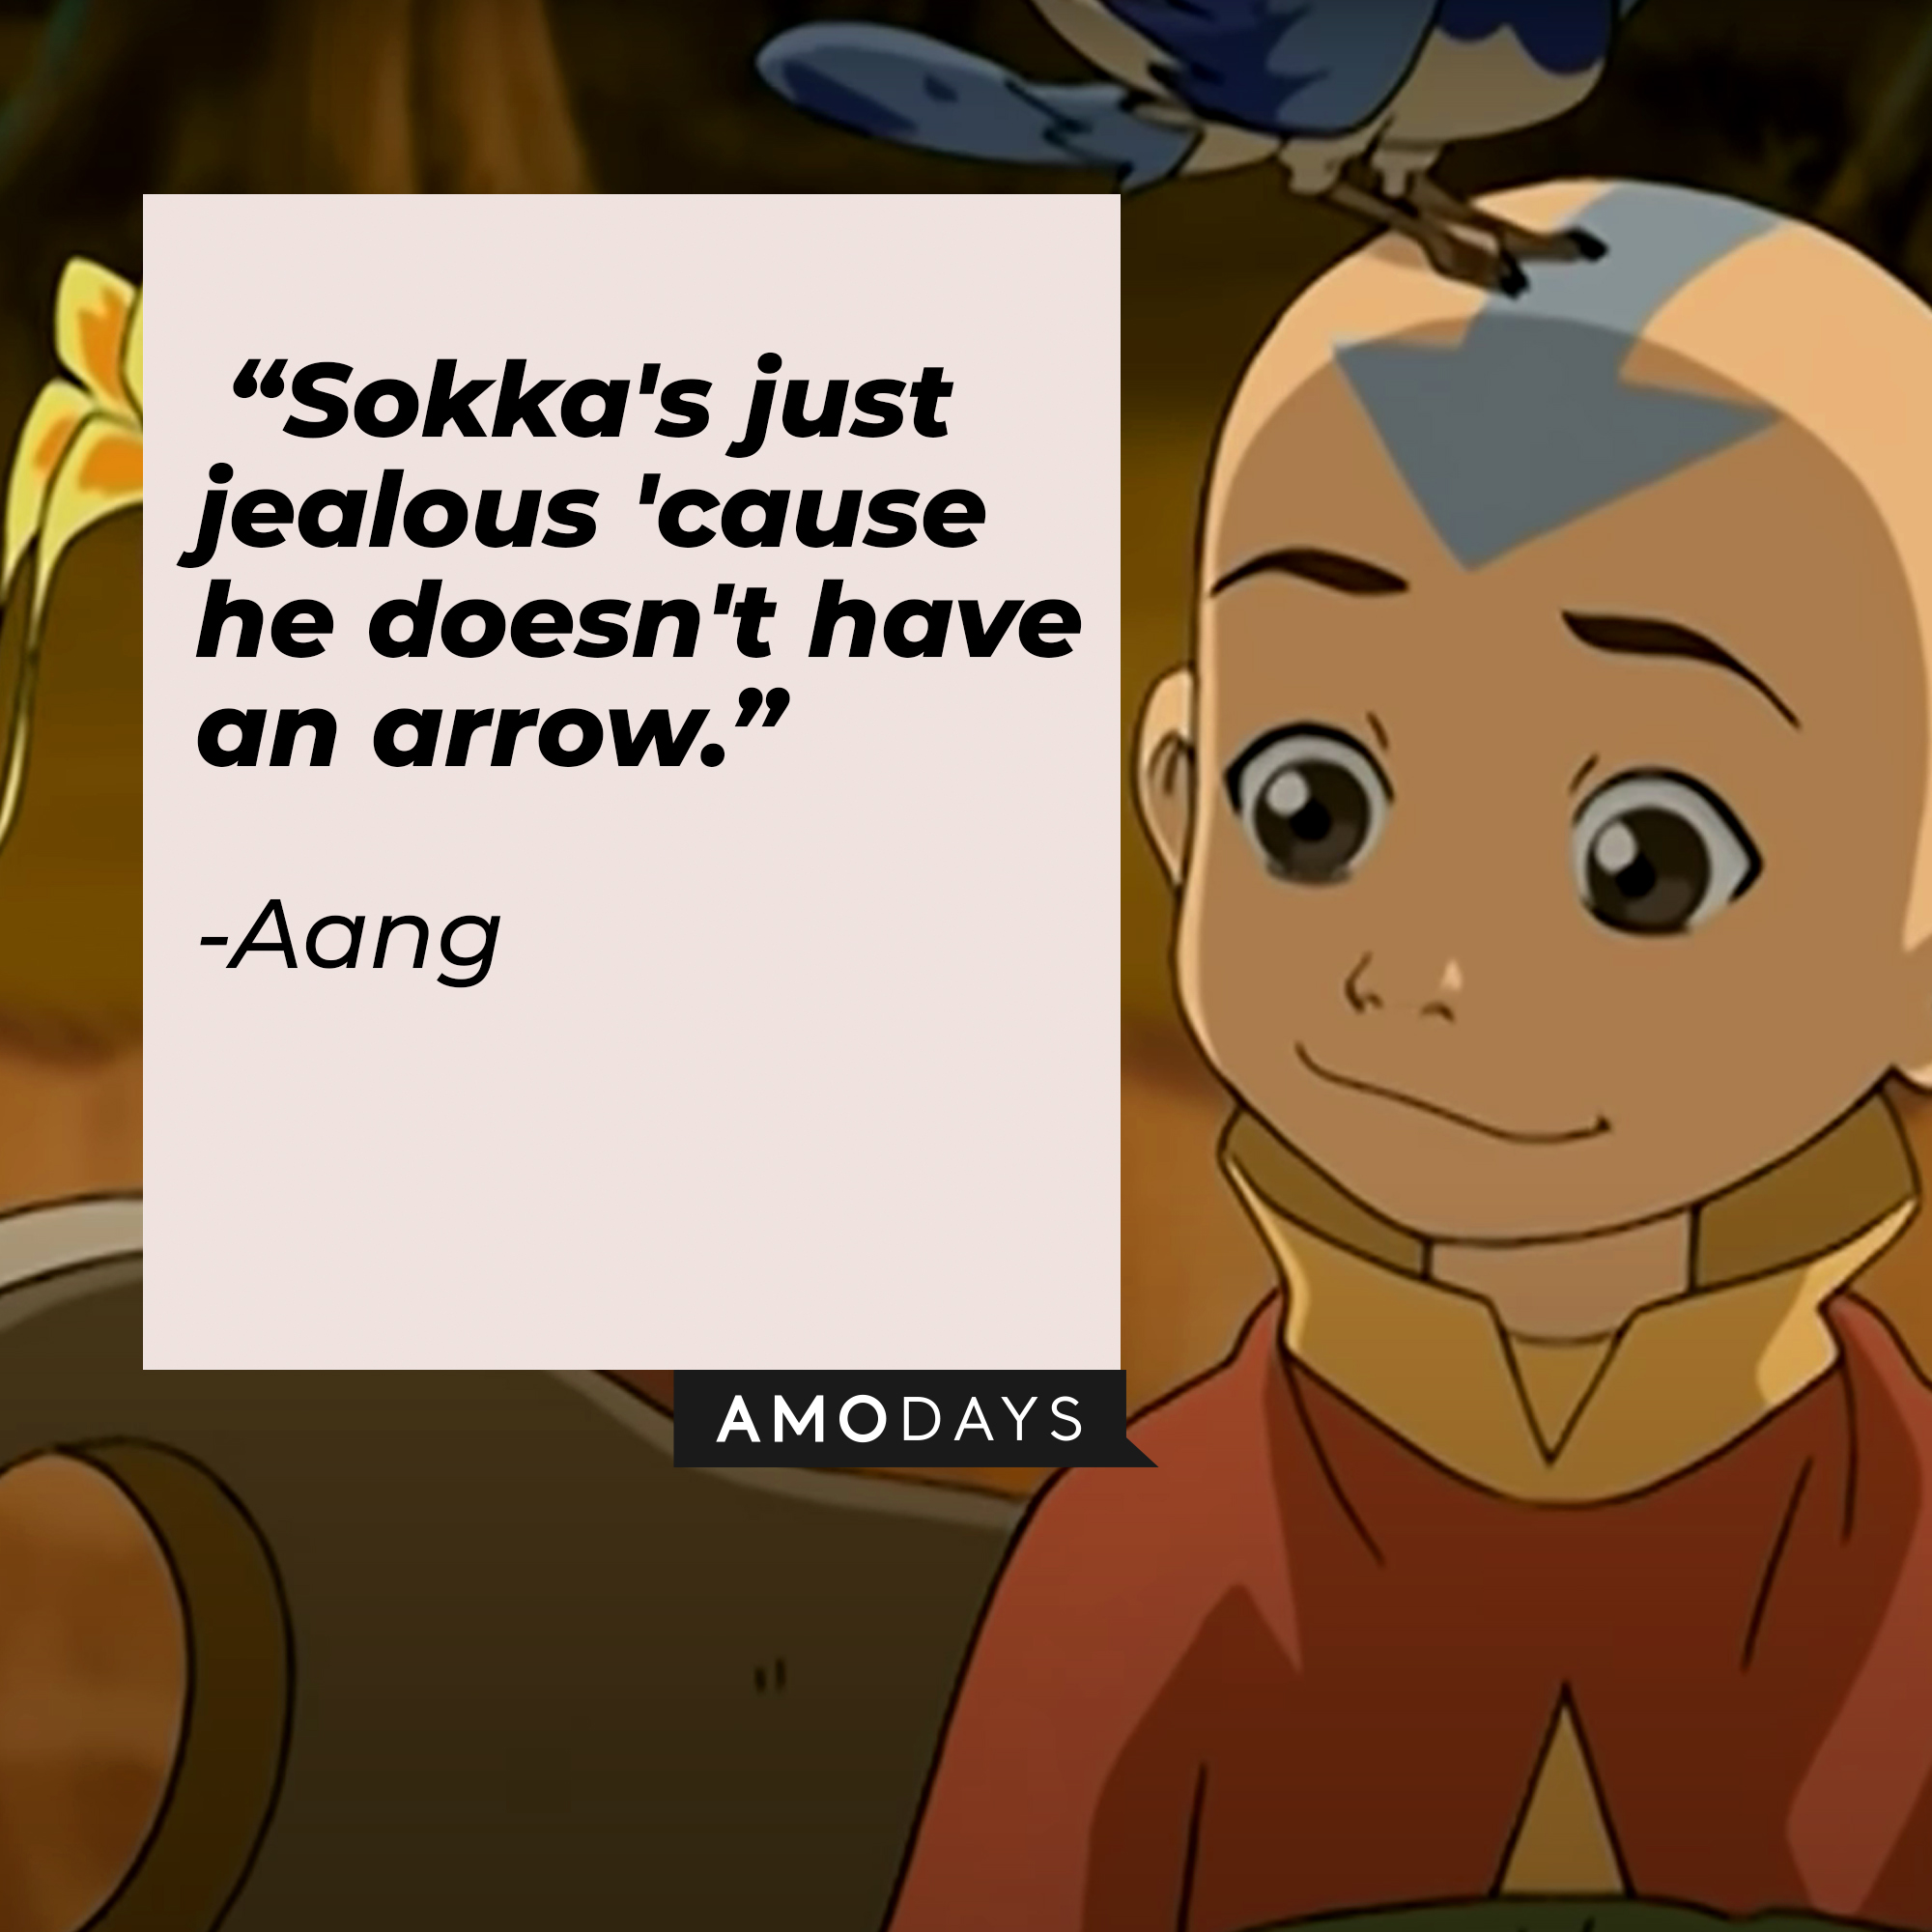 Aang’s quote: “Sokka's just jealous 'cause he doesn't have an arrow.” | Source: Youtube.com/TeamAvatar